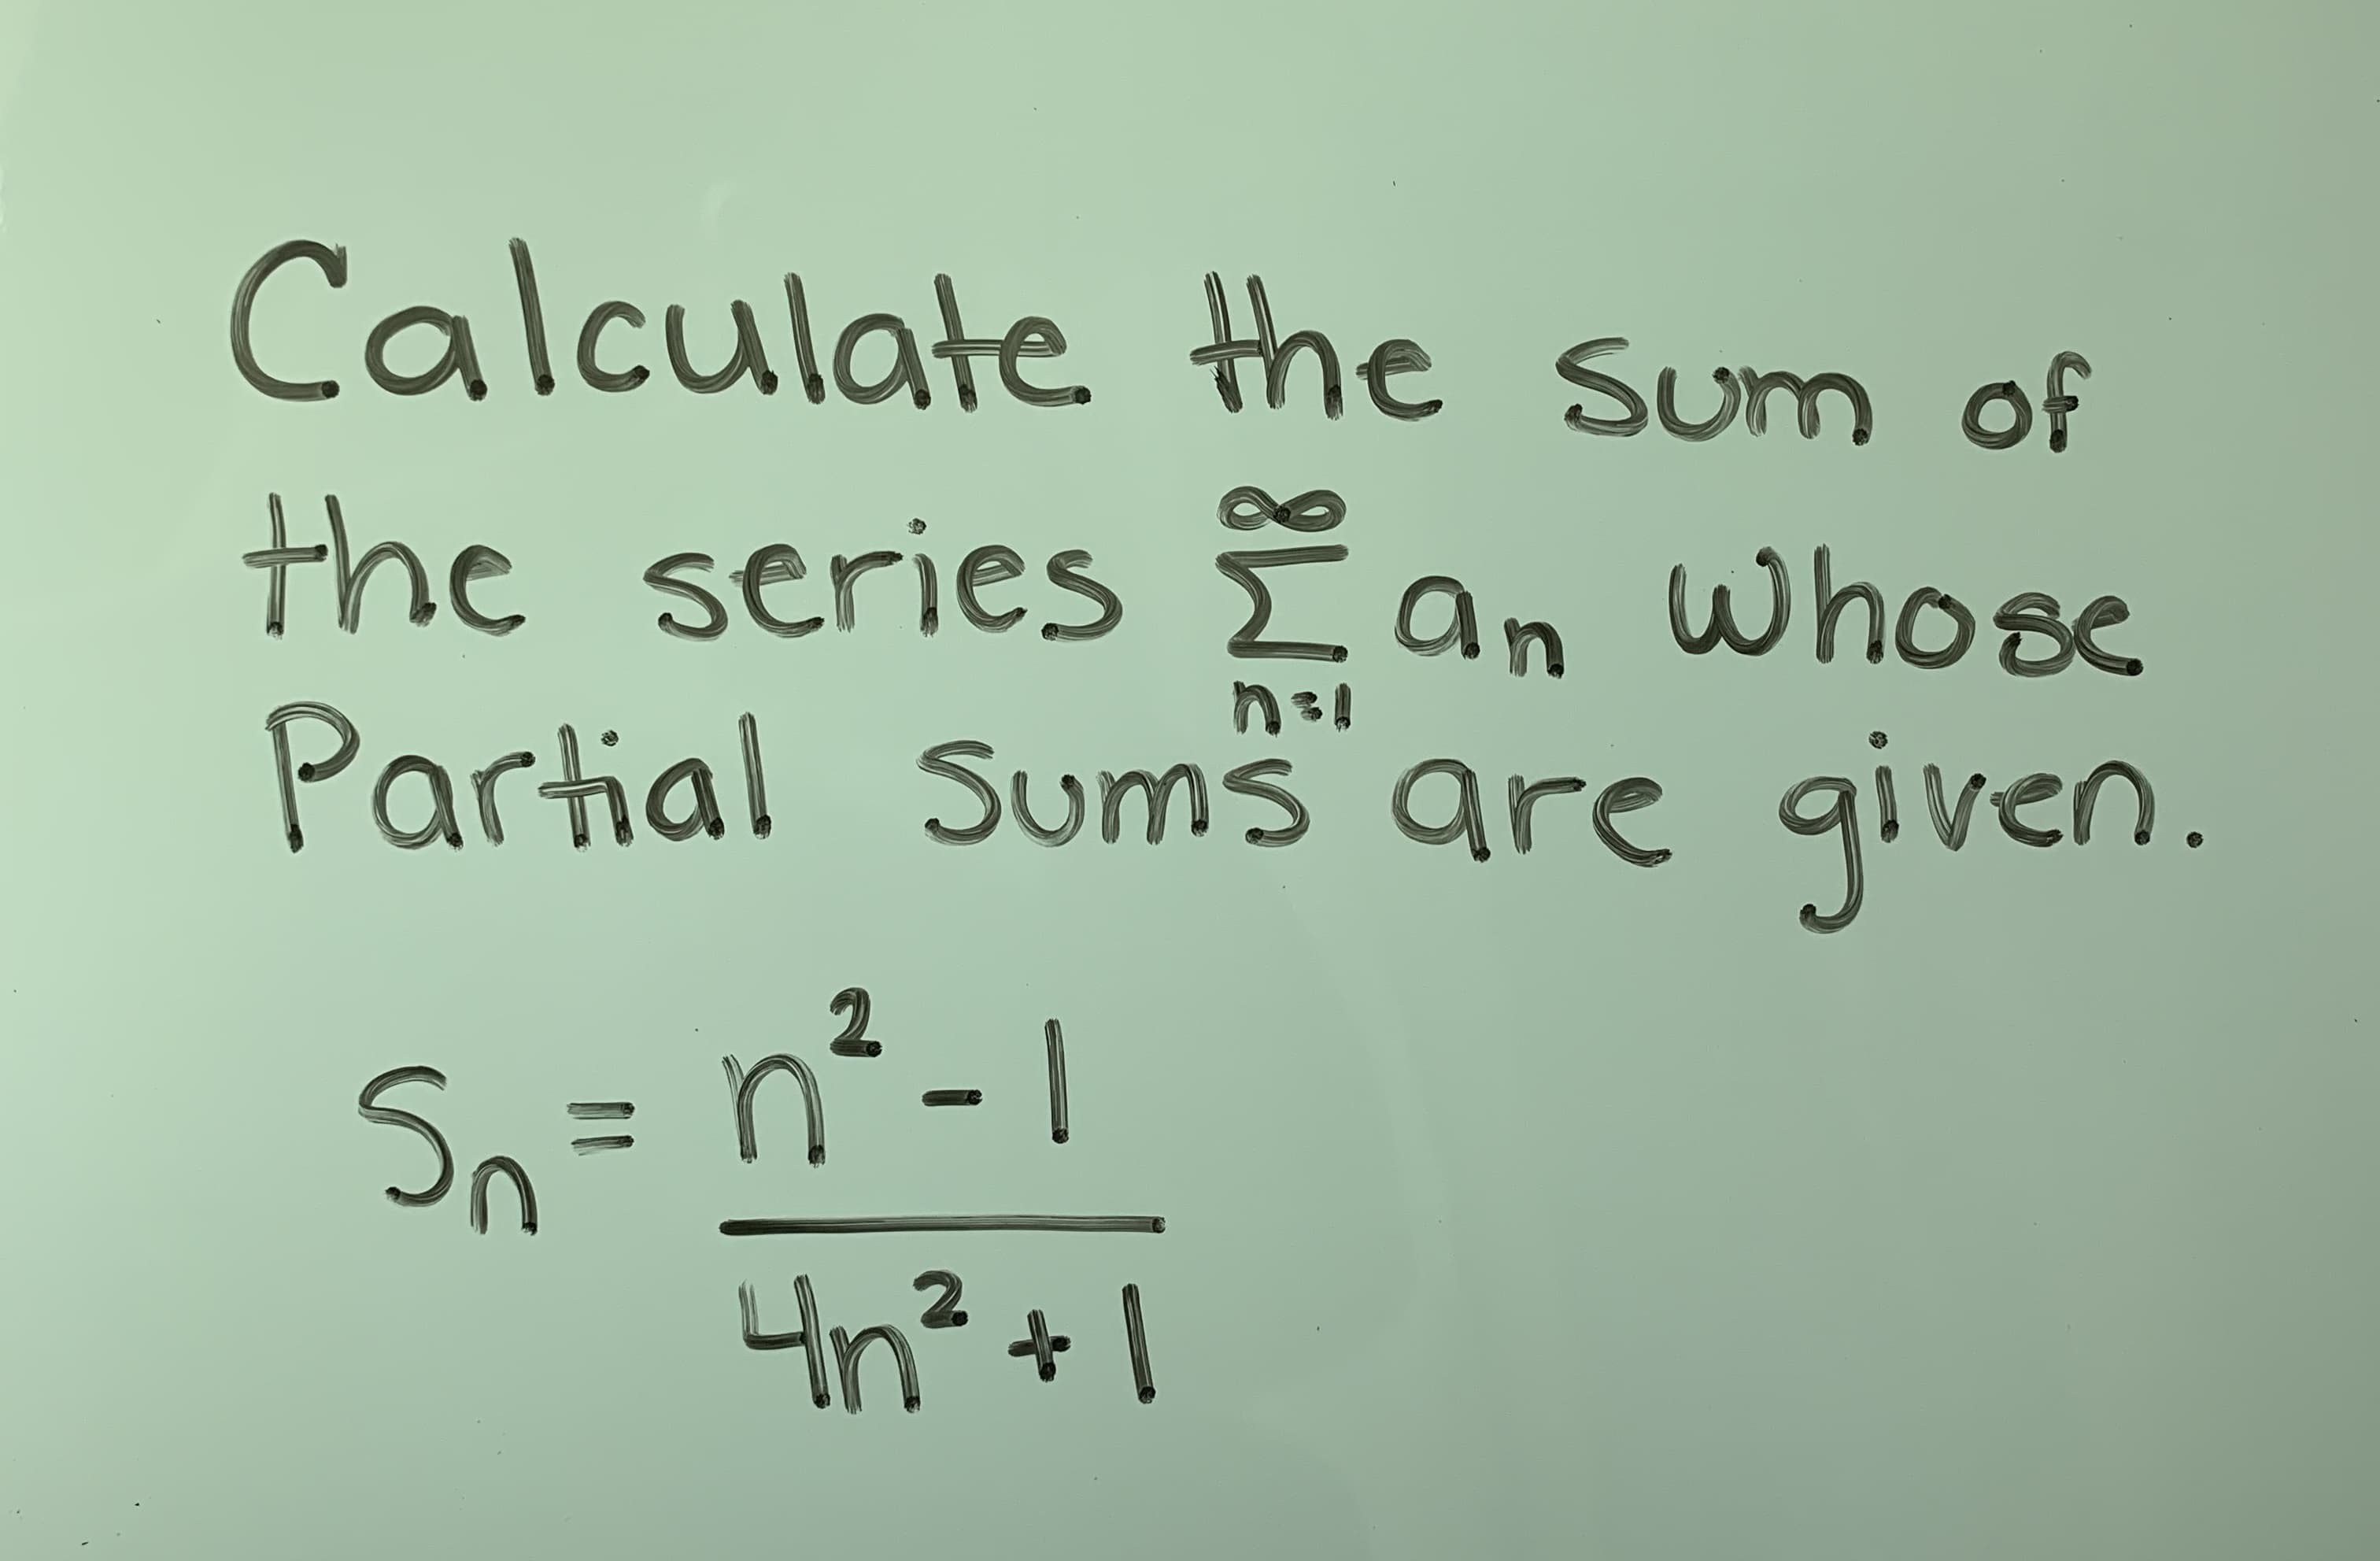 Calculate the sum of
the series Σ an whose
arhal Sums are given
2
Sn
